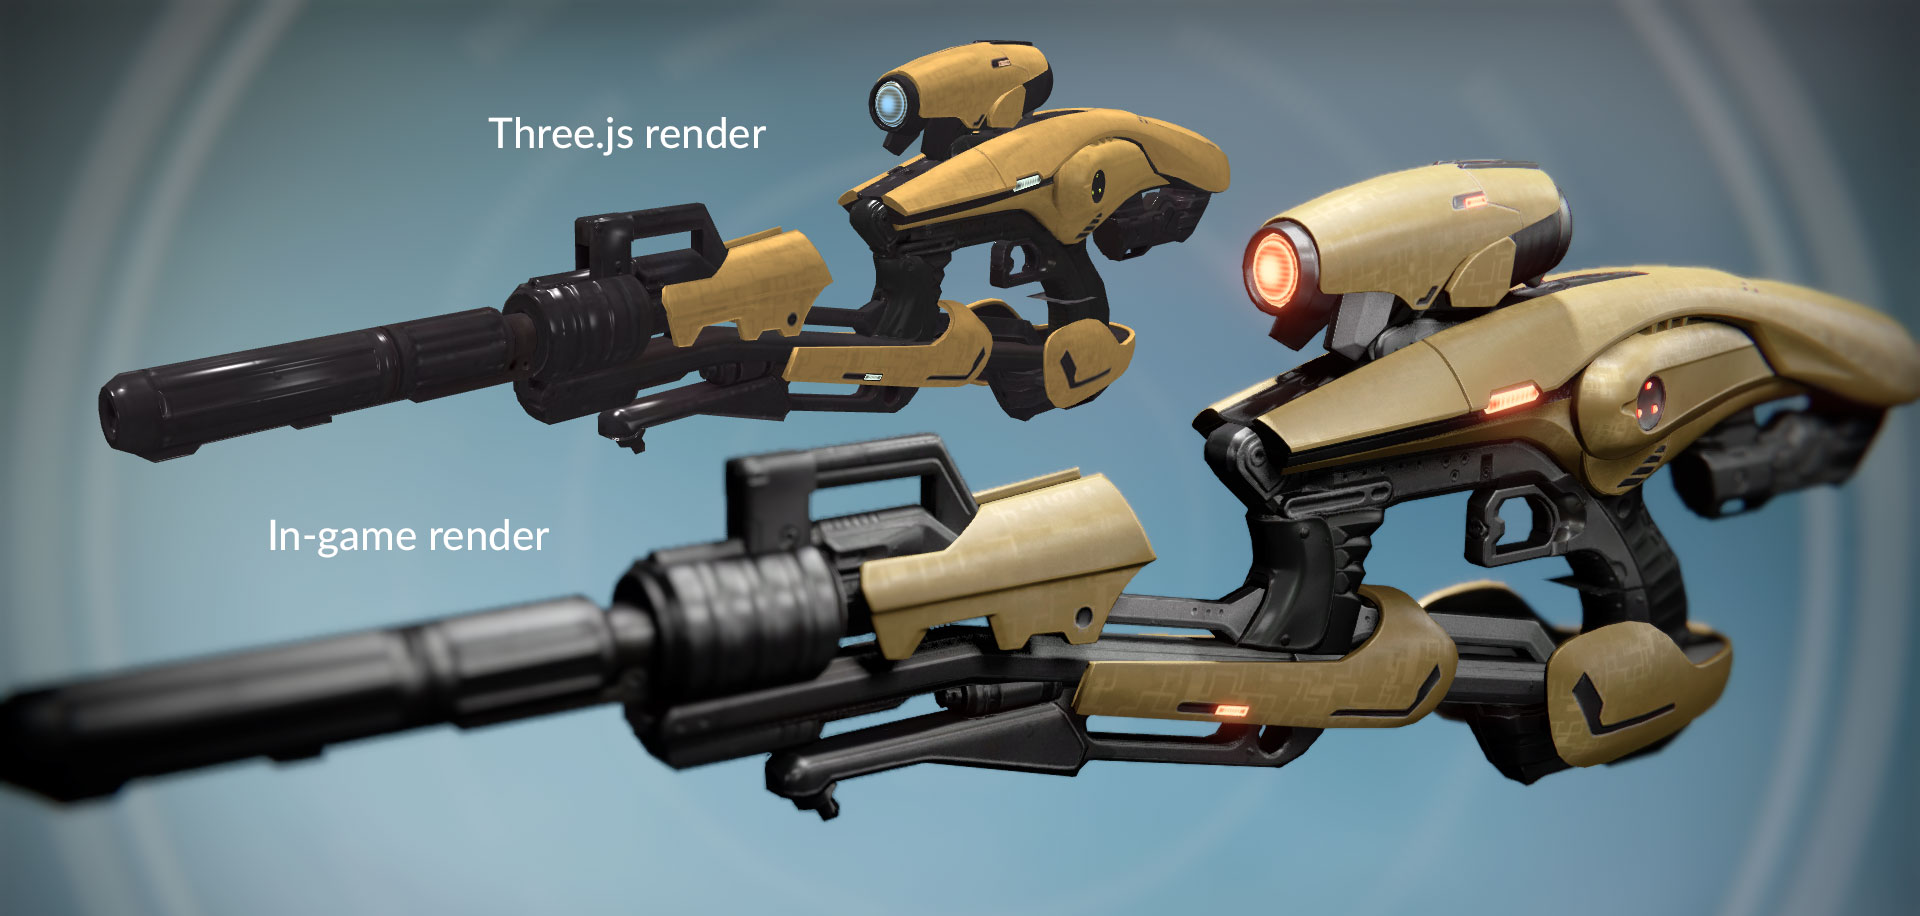 The Vex Mythoclast has lots of glass materials that emit an orange glow. I'm not certain how the color is being applied yet either.